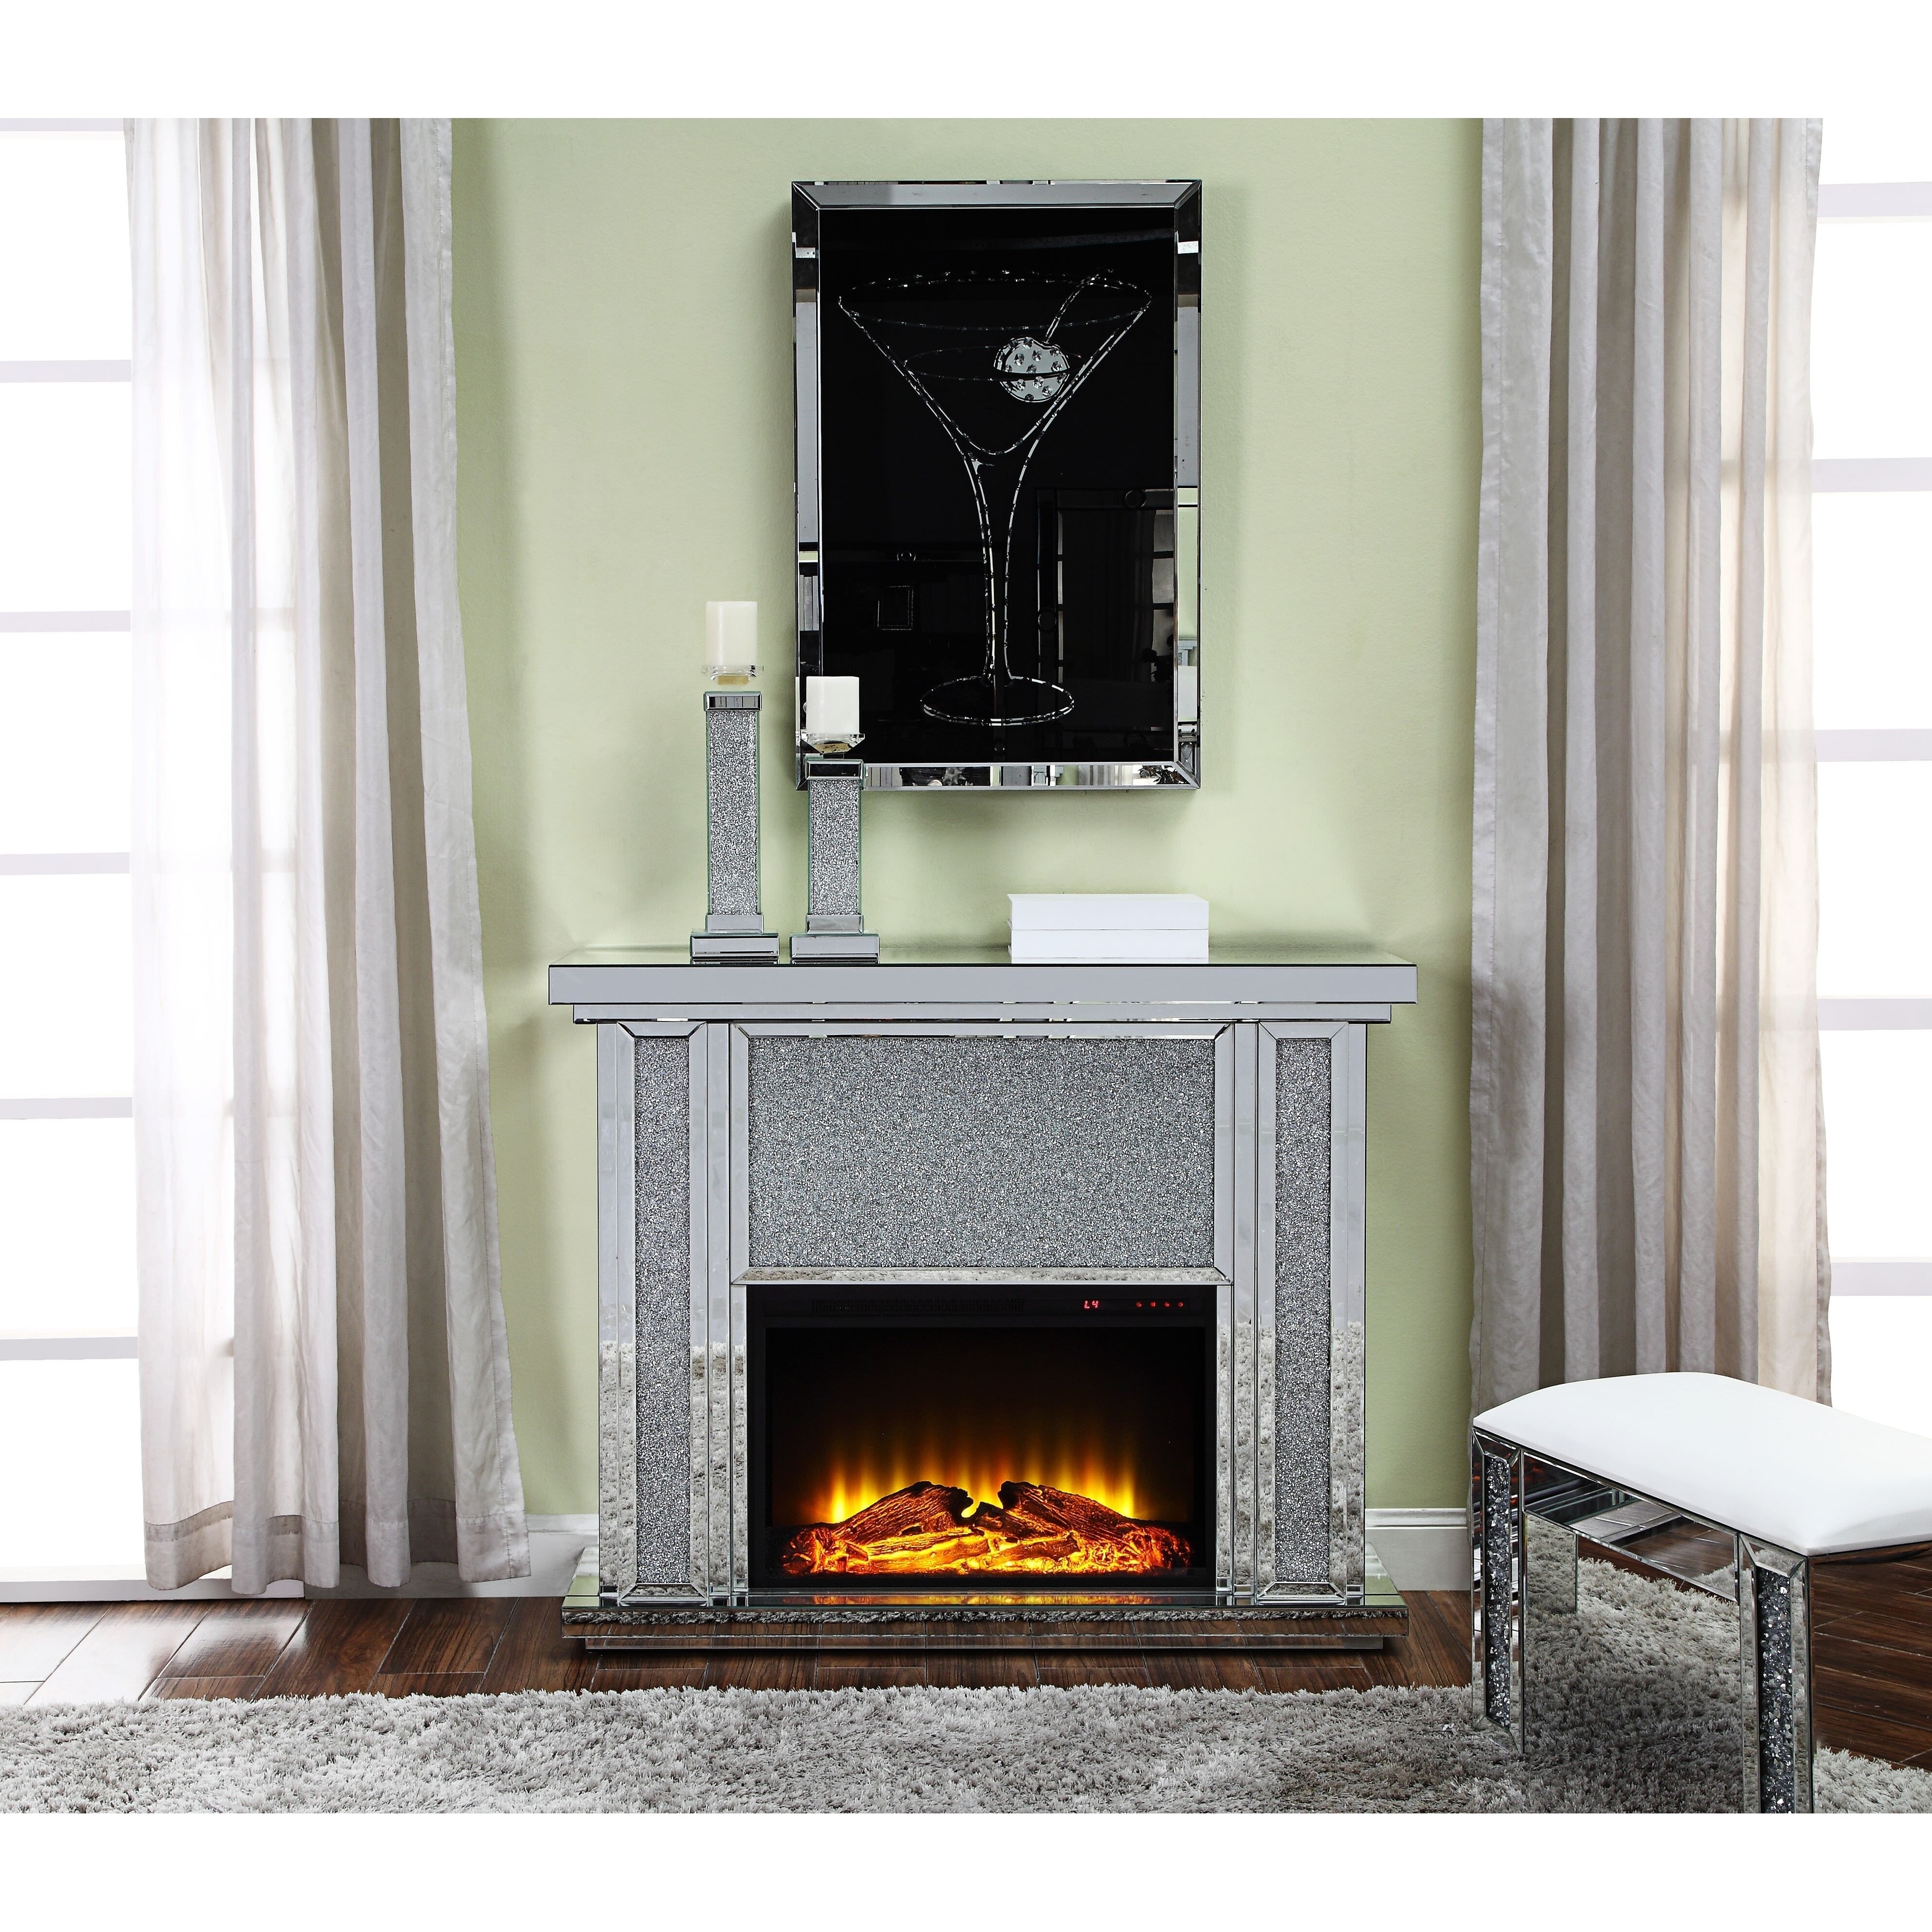 Acme Nowles Fireplace, Mirrored and Faux Stones